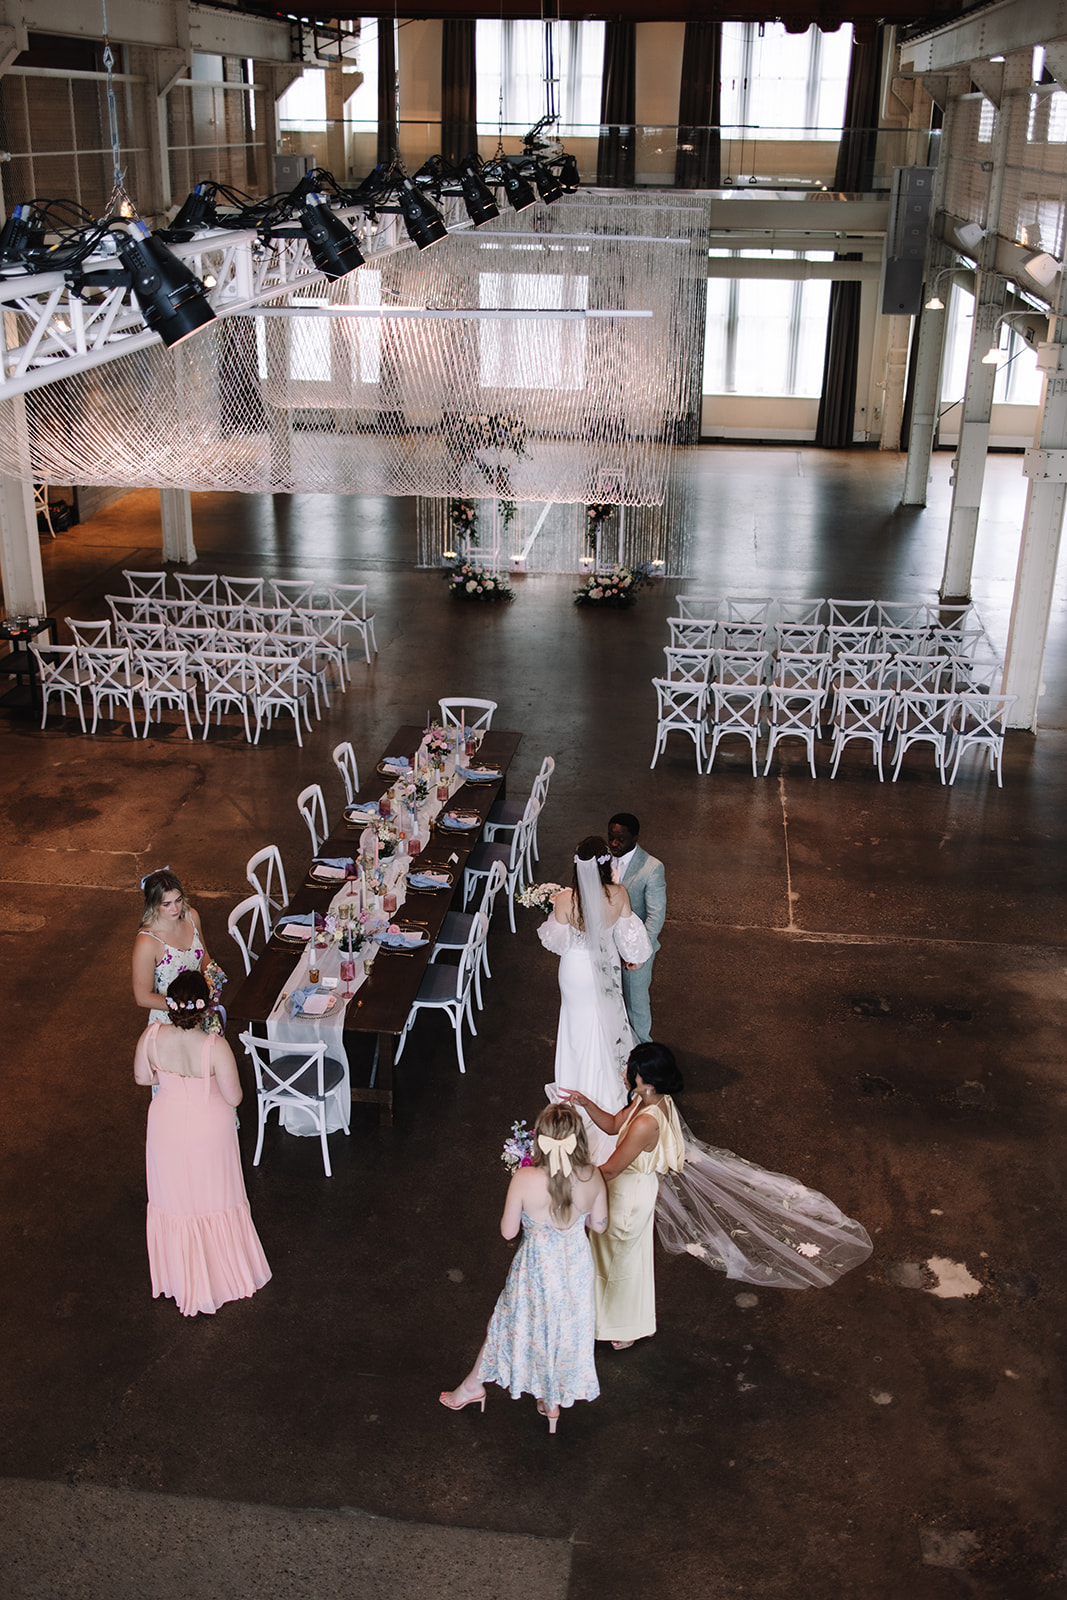 A wedding rehearsal in a spacious, industrial-style venue with large windows. Six people are gathered; the bride is dressed in white with a long veil, and the wedding party is wearing various pastel gowns and suits at the Machine Shop in Minneapolis